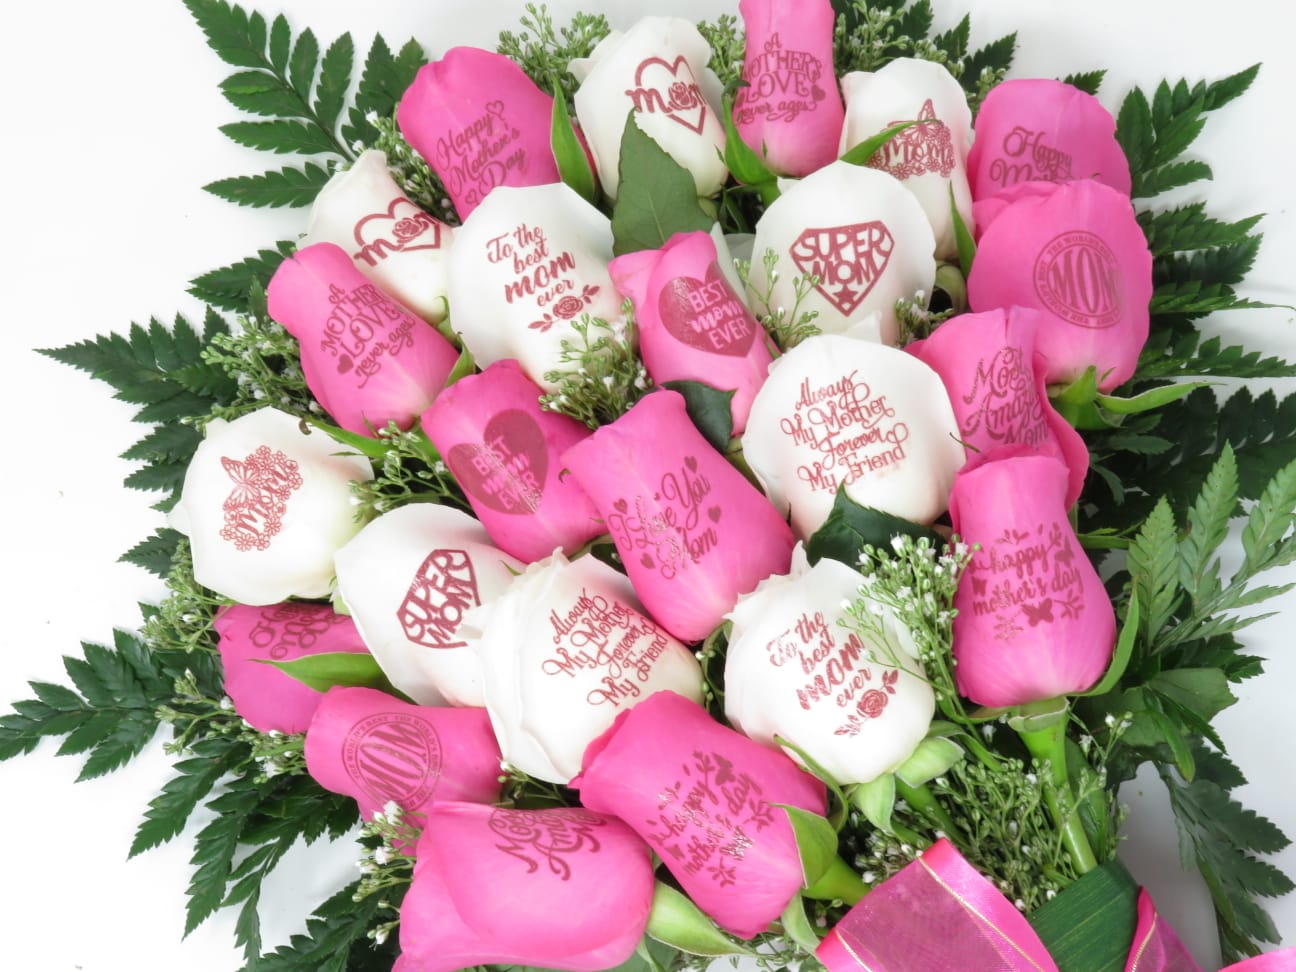 24 Roses Bouquet For Mother's Day With Love Messages Printed On Each (Pink And White Roses)